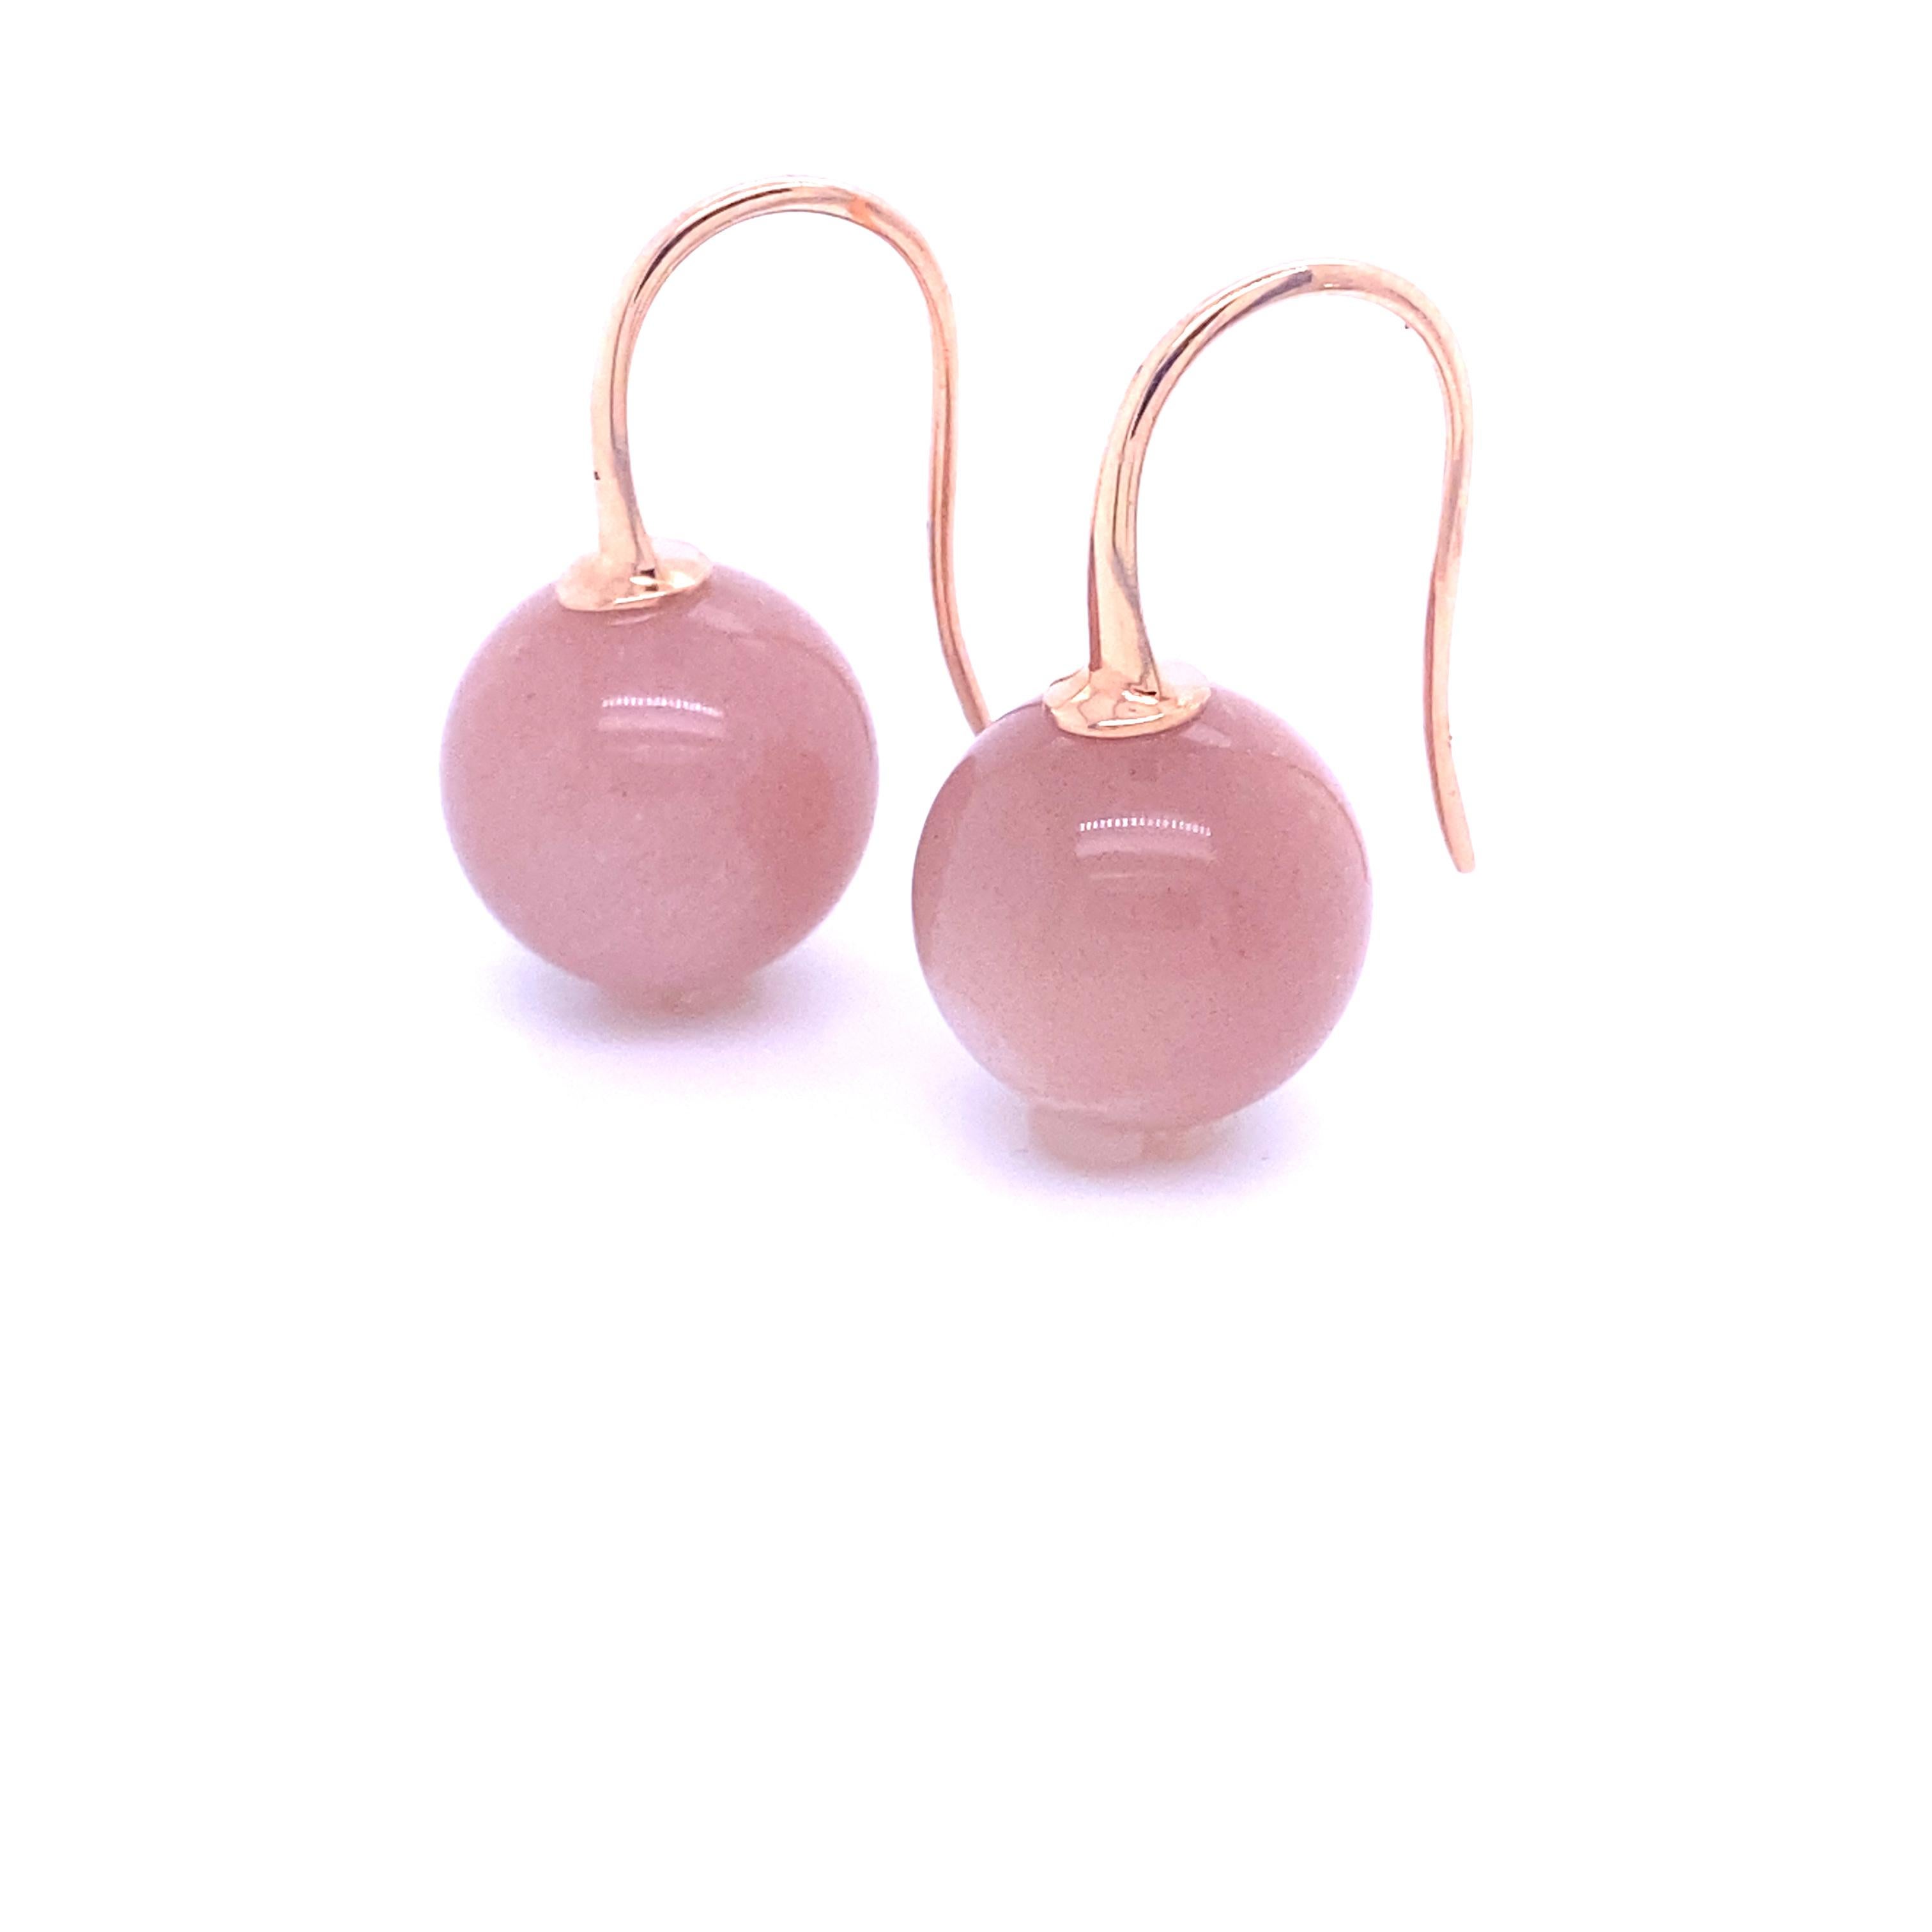 Discover these beautiful 18-carat pink gold dangling earrings, adorned with a peach moonstone. These earrings are both elegant and easy to wear, adding a touch of charm and softness to your look.

Peach moonstone is known for its soothing and